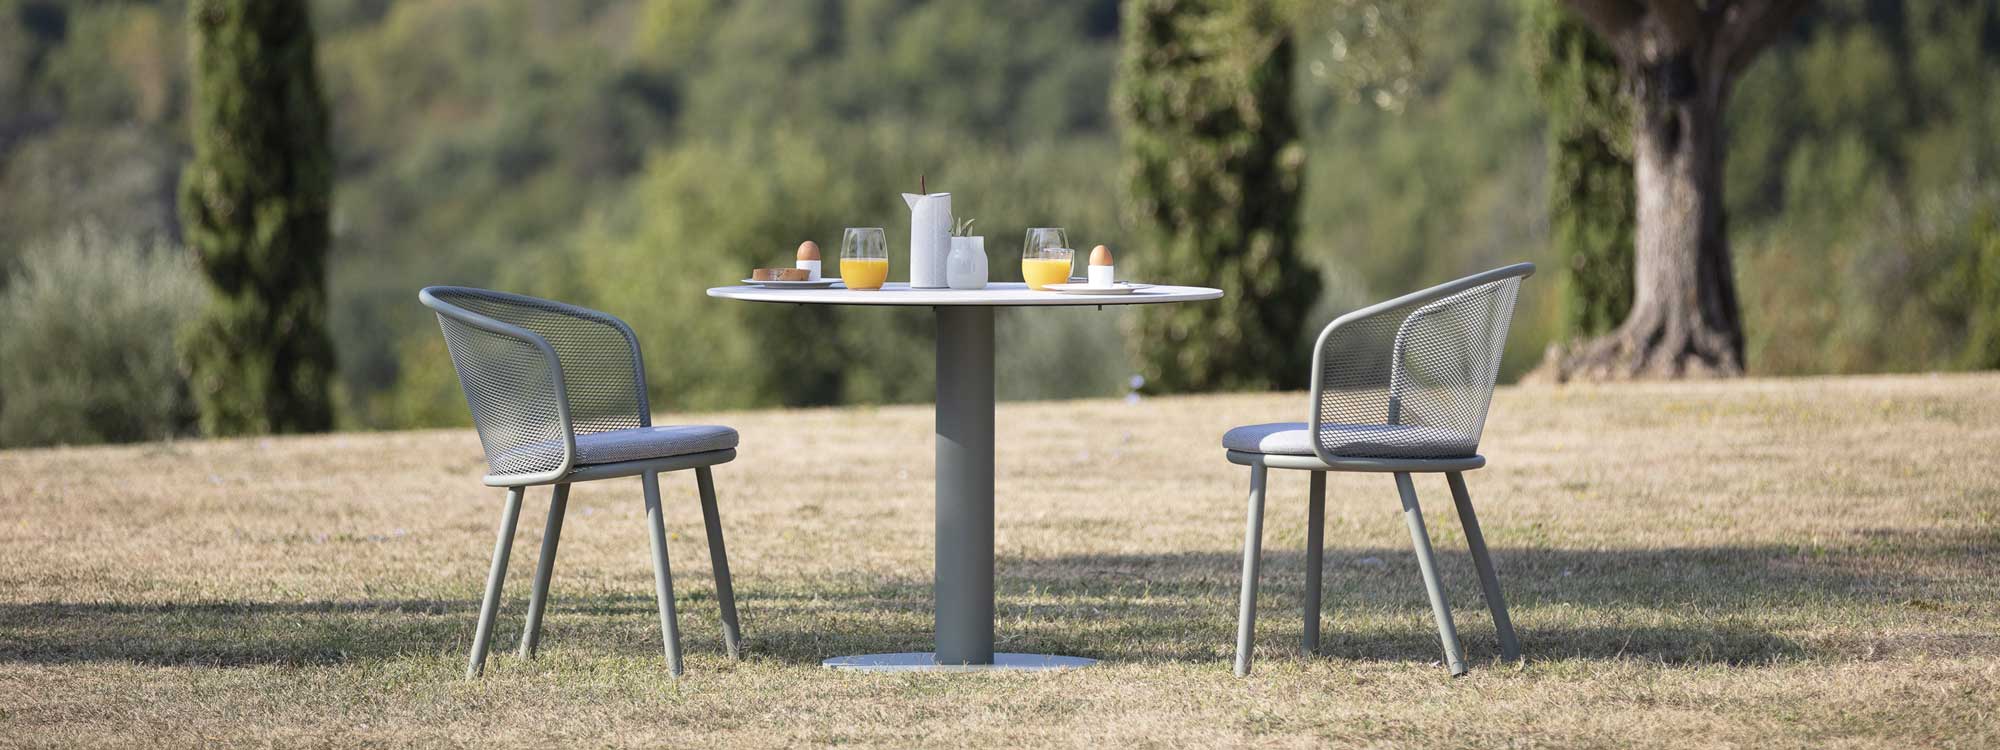 Image of taupe Baza modern garden chairs and Branta small round garden table on scorched grass with trees in the background